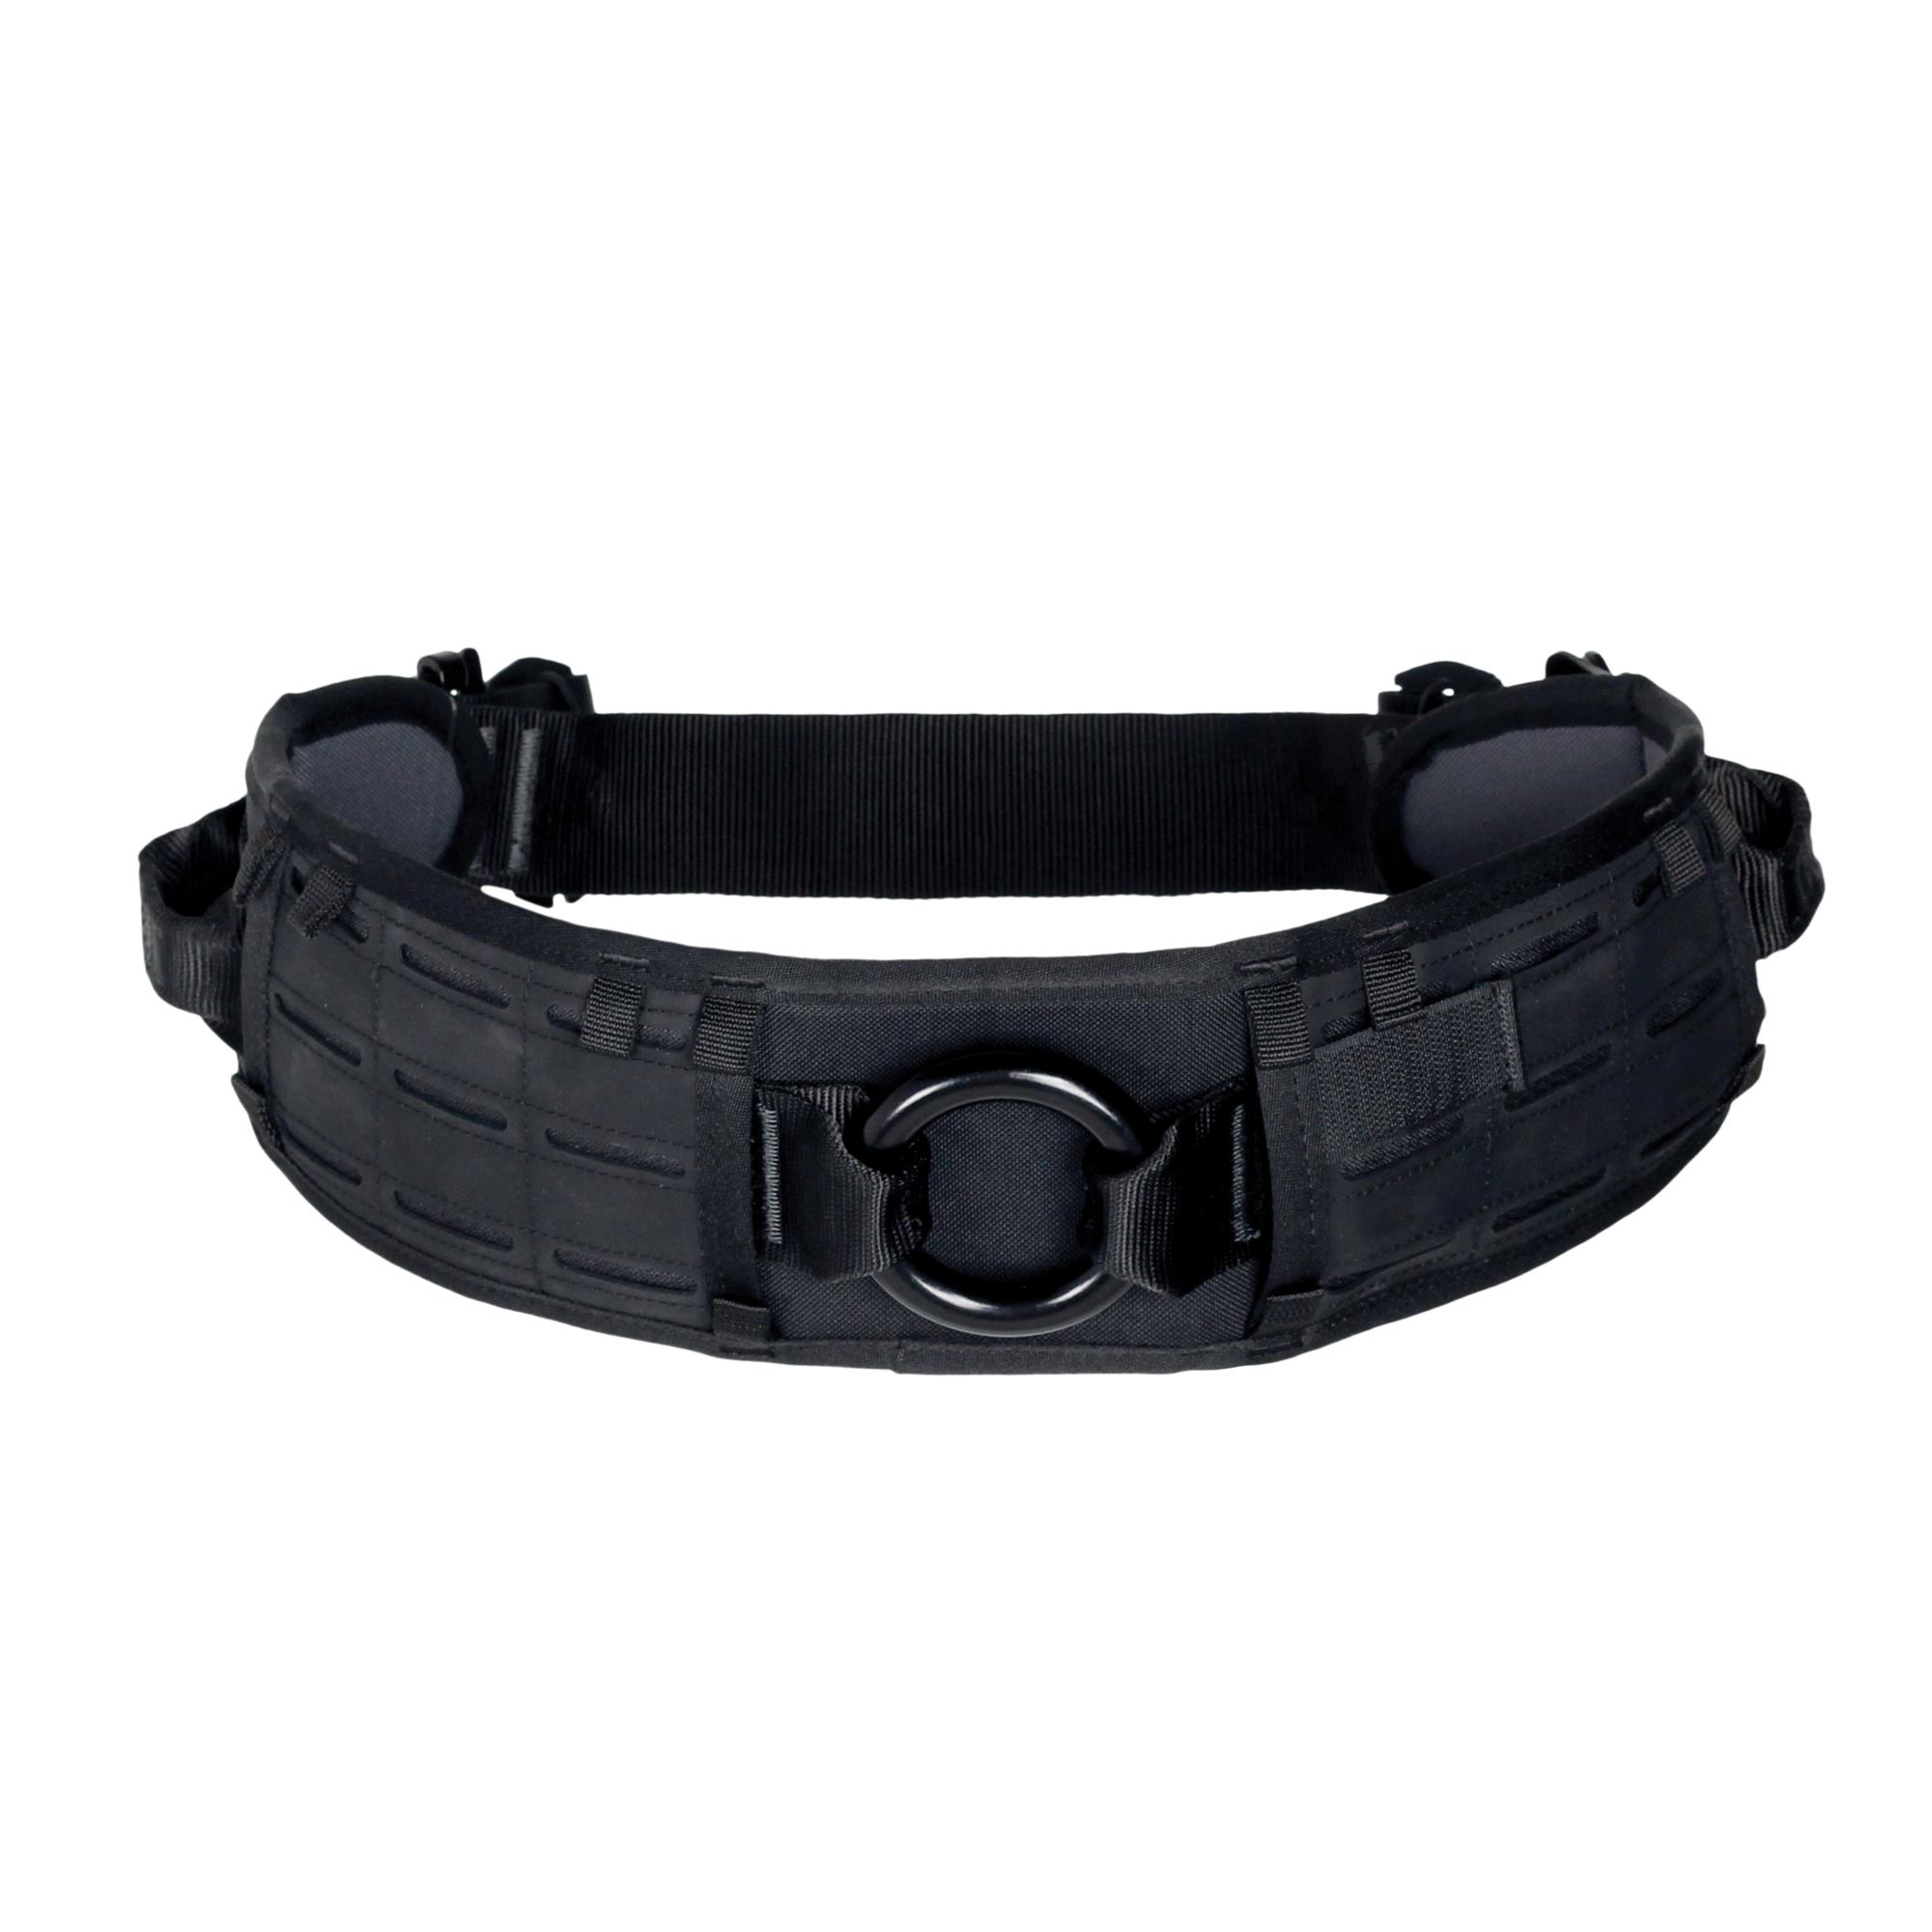 Belt from Tactic Master Safety Harness